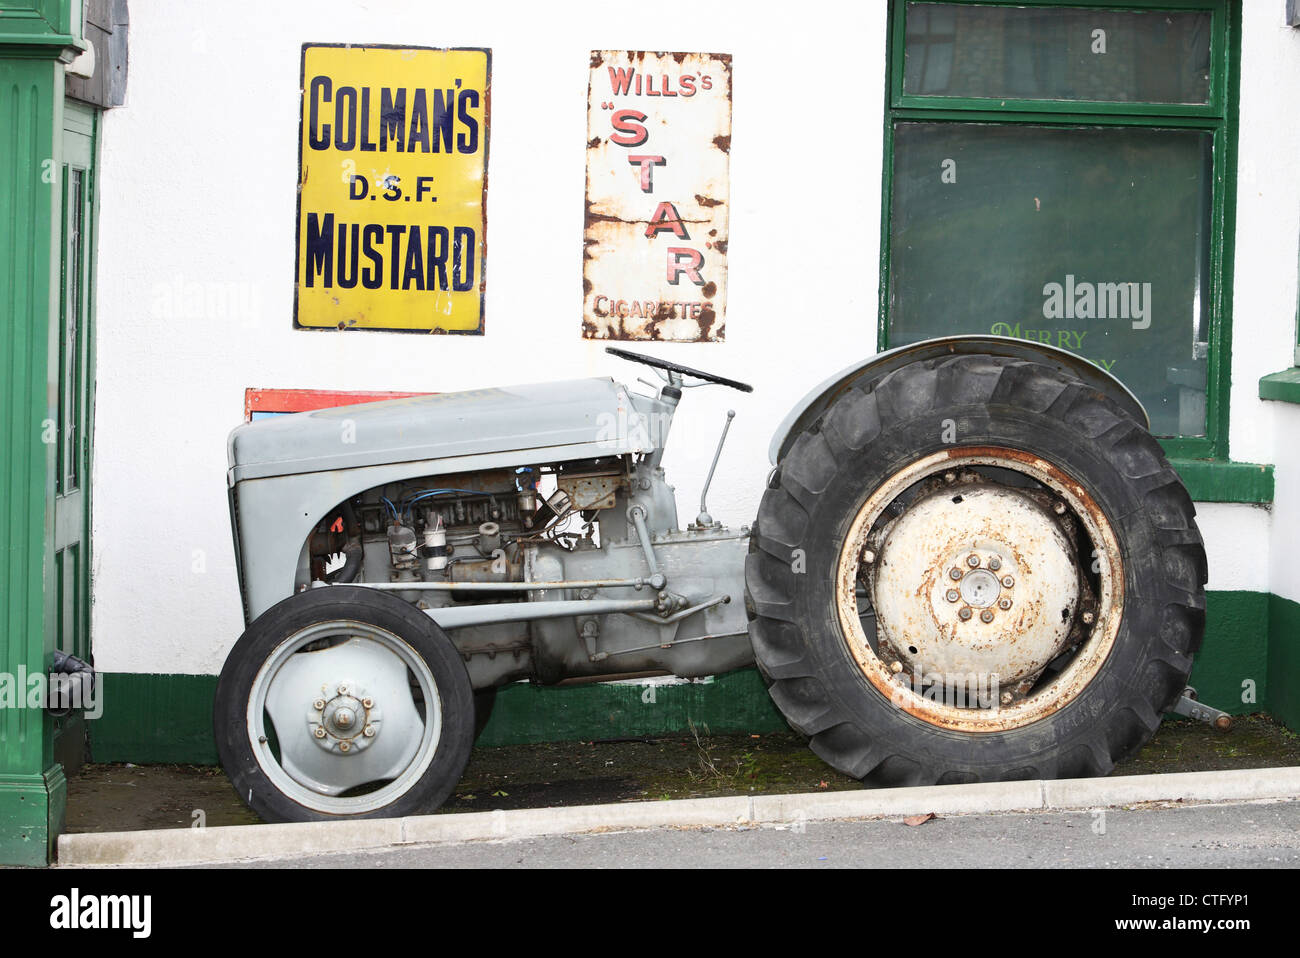 Vintage tractor outside the Merry Ploughboy Pub Ireland Stock Photo